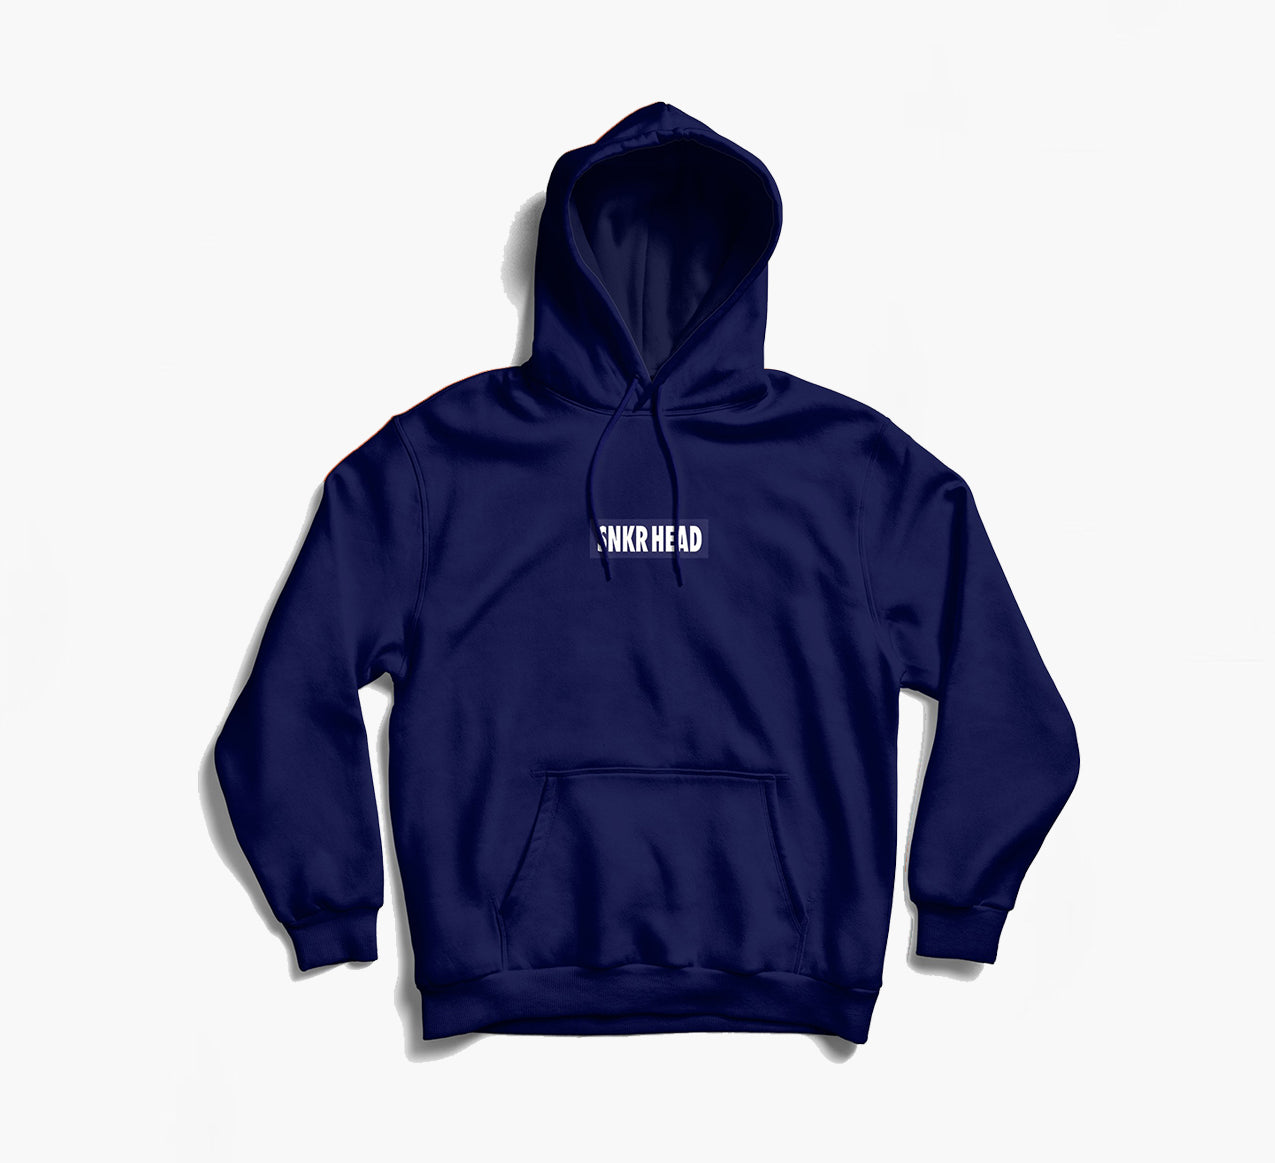 SNKR HEAD Embroidered Box Logo Navy Blue Hoodie